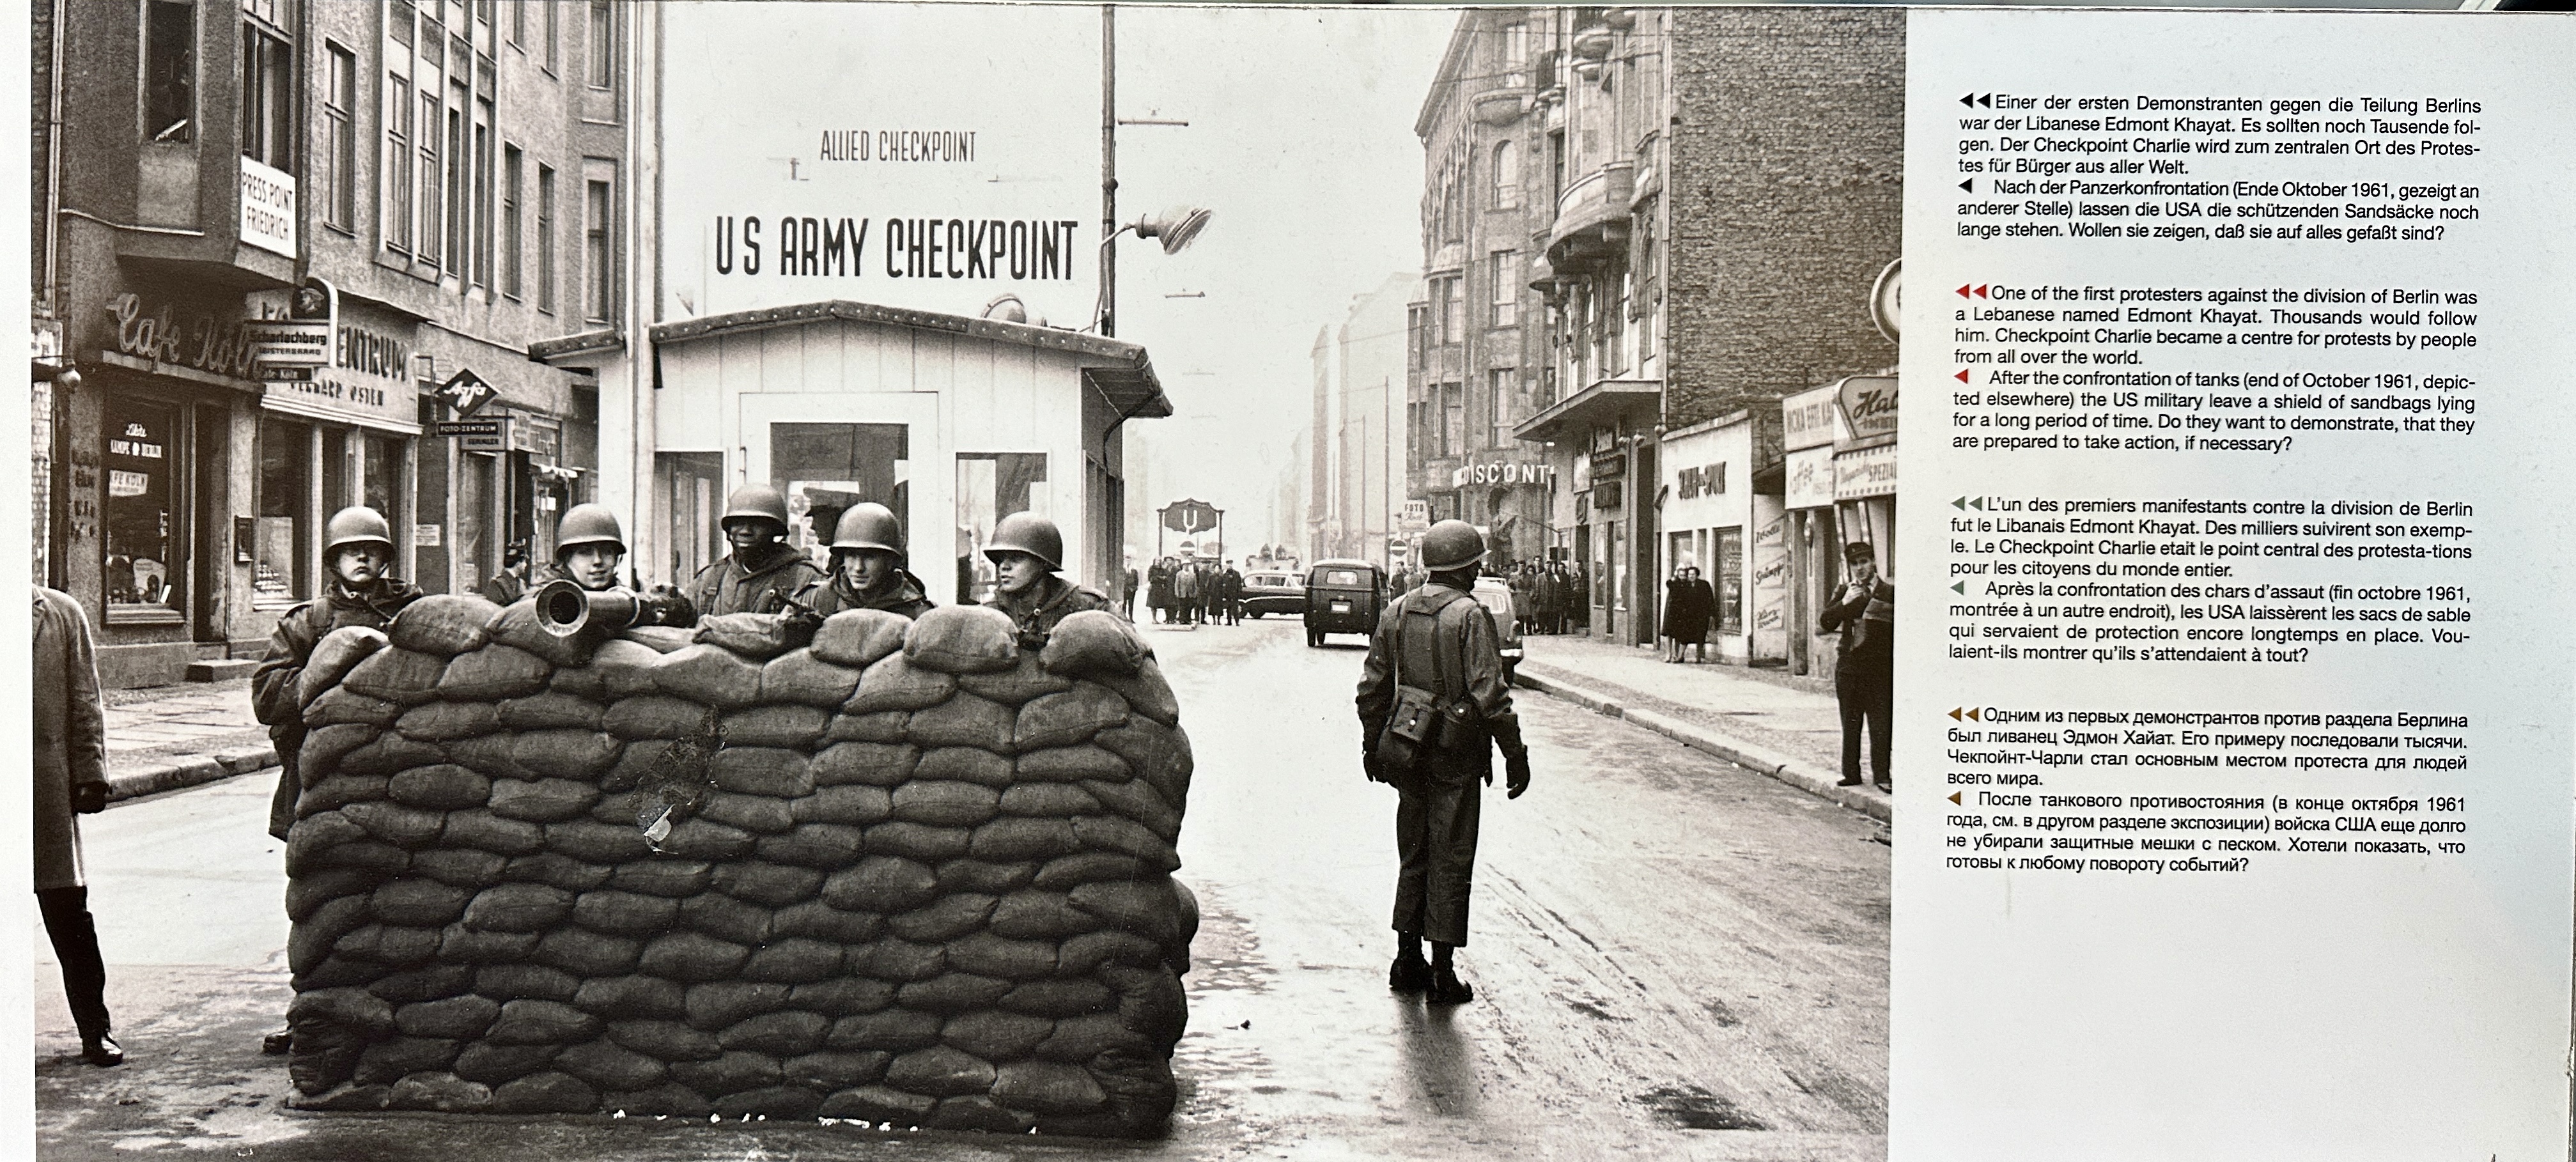 US ARMY CHECKPOINT